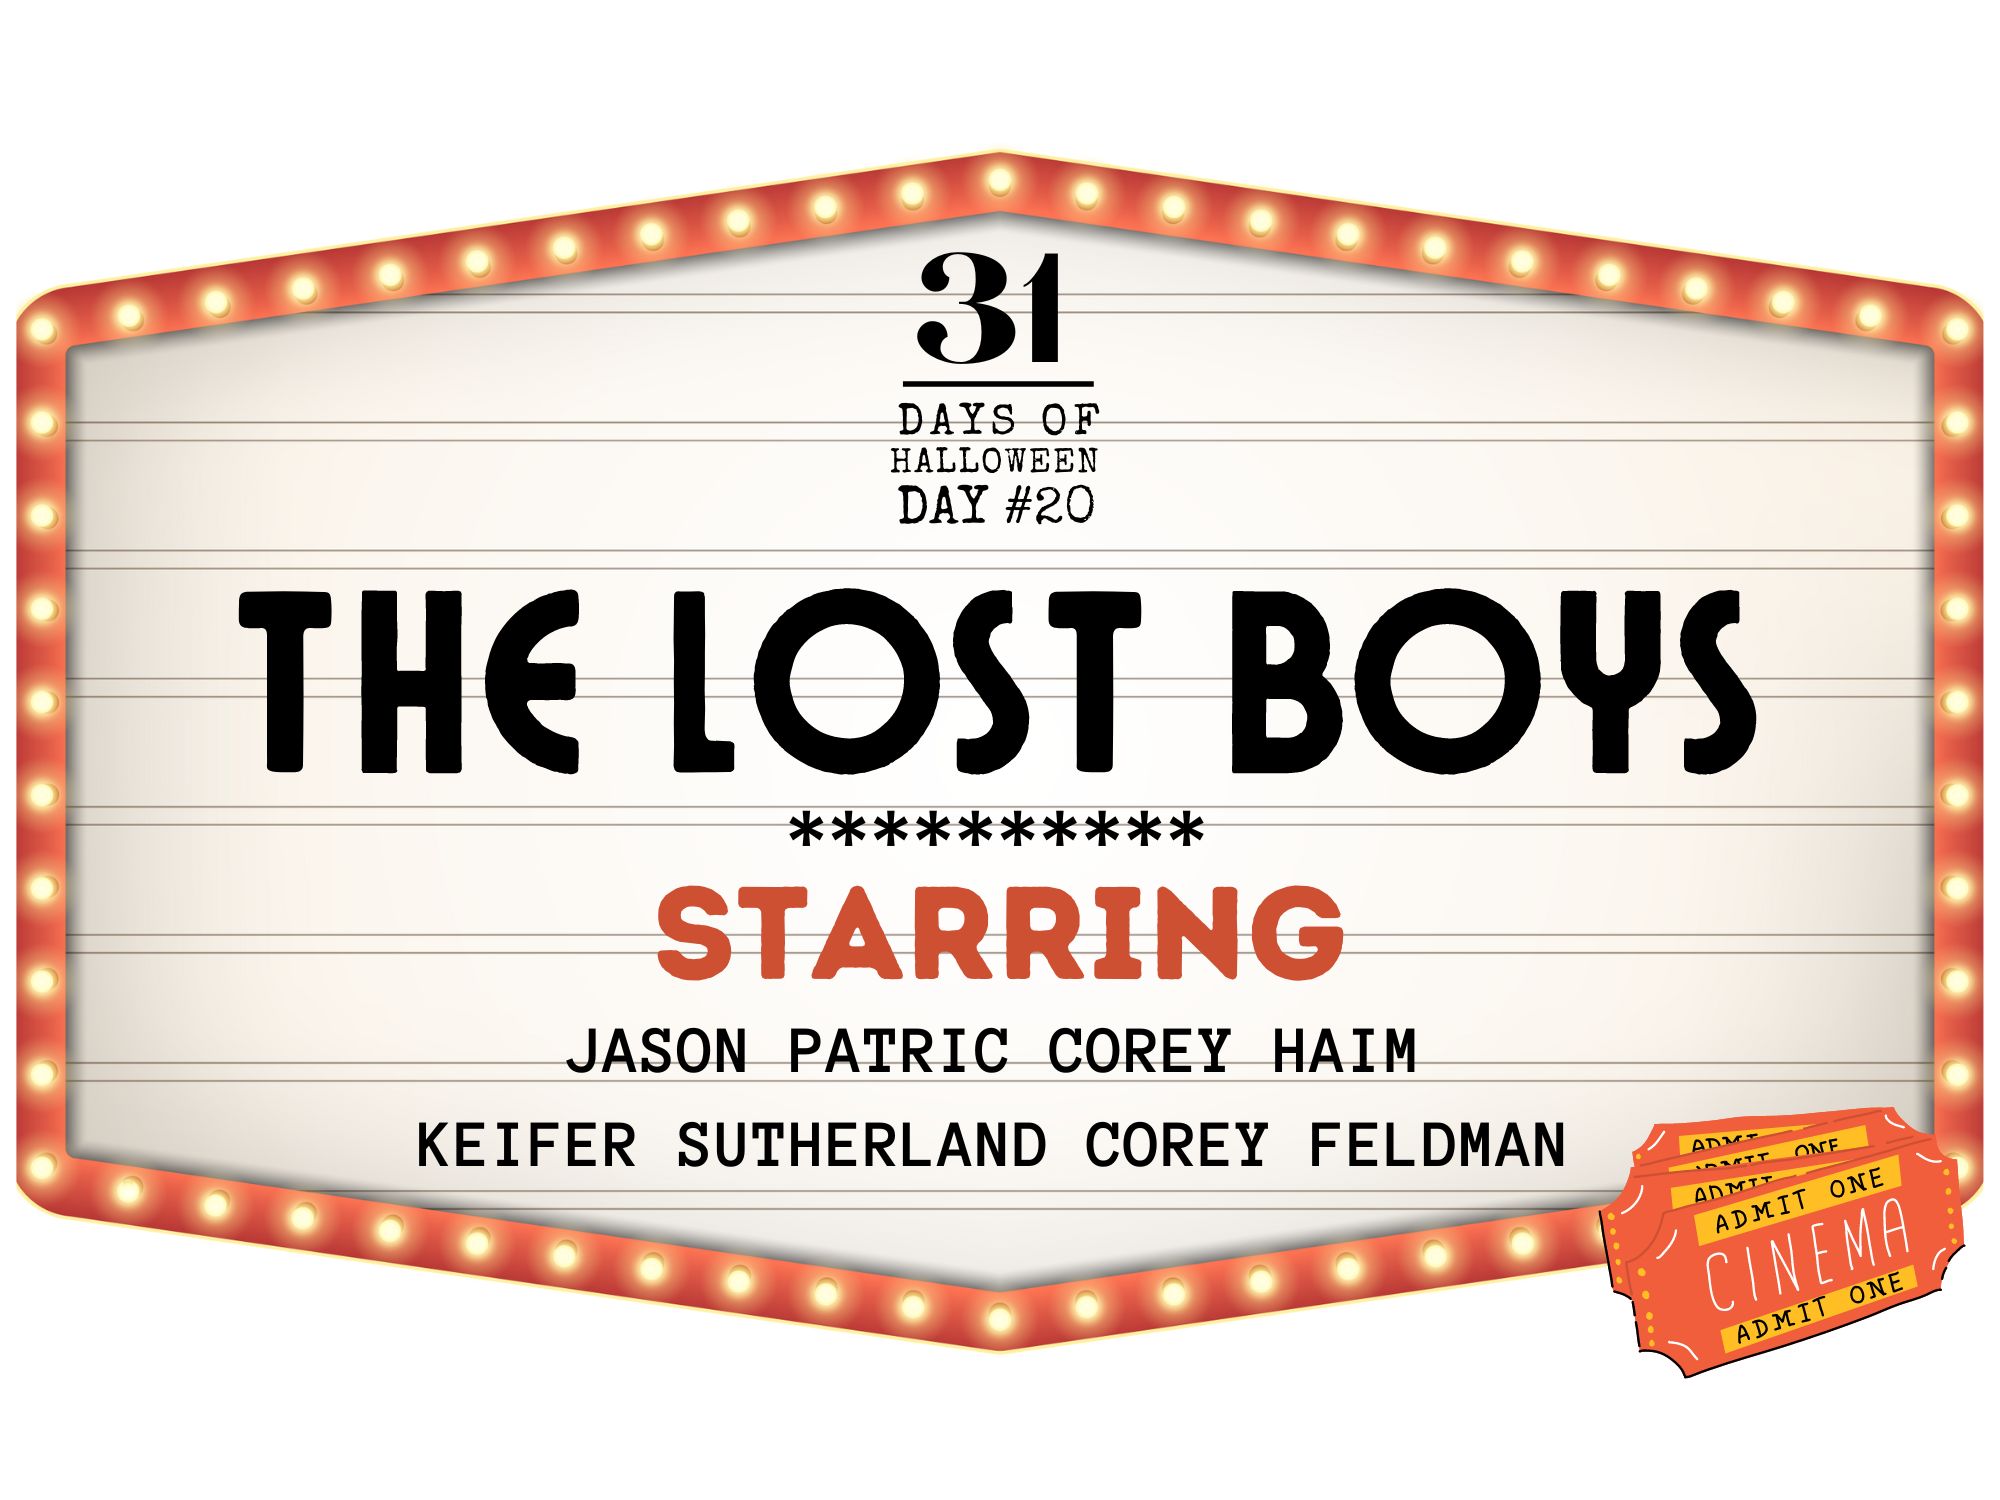 31 Days of Halloween: Day #20, The Lost Boys